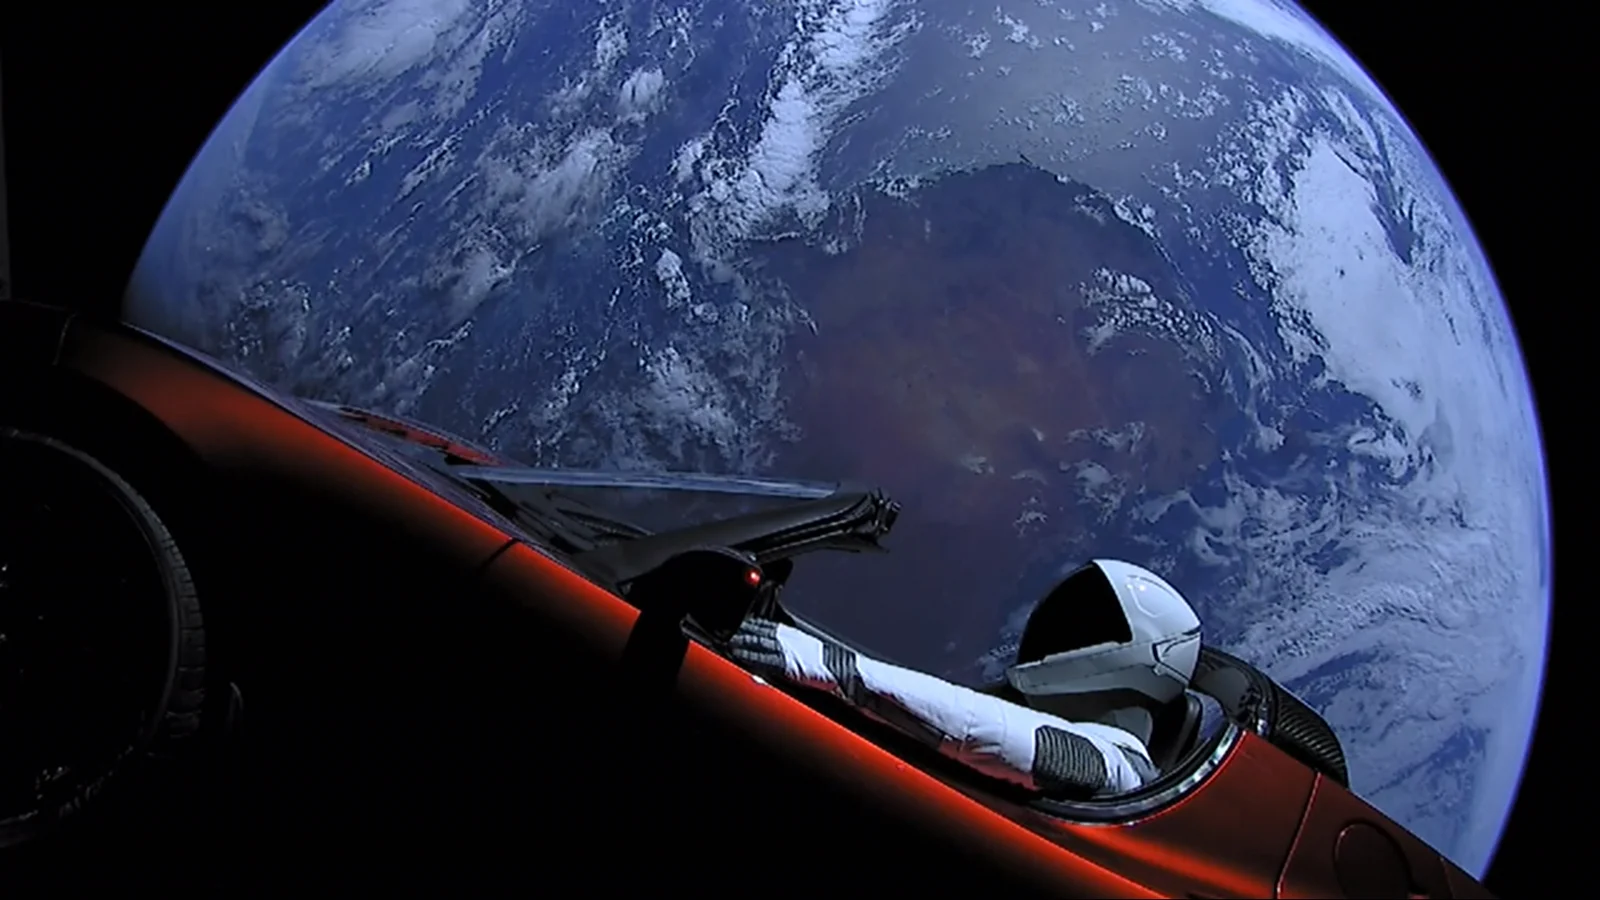 'Starman' Tesla Roadster just had its first close encounter with Mars